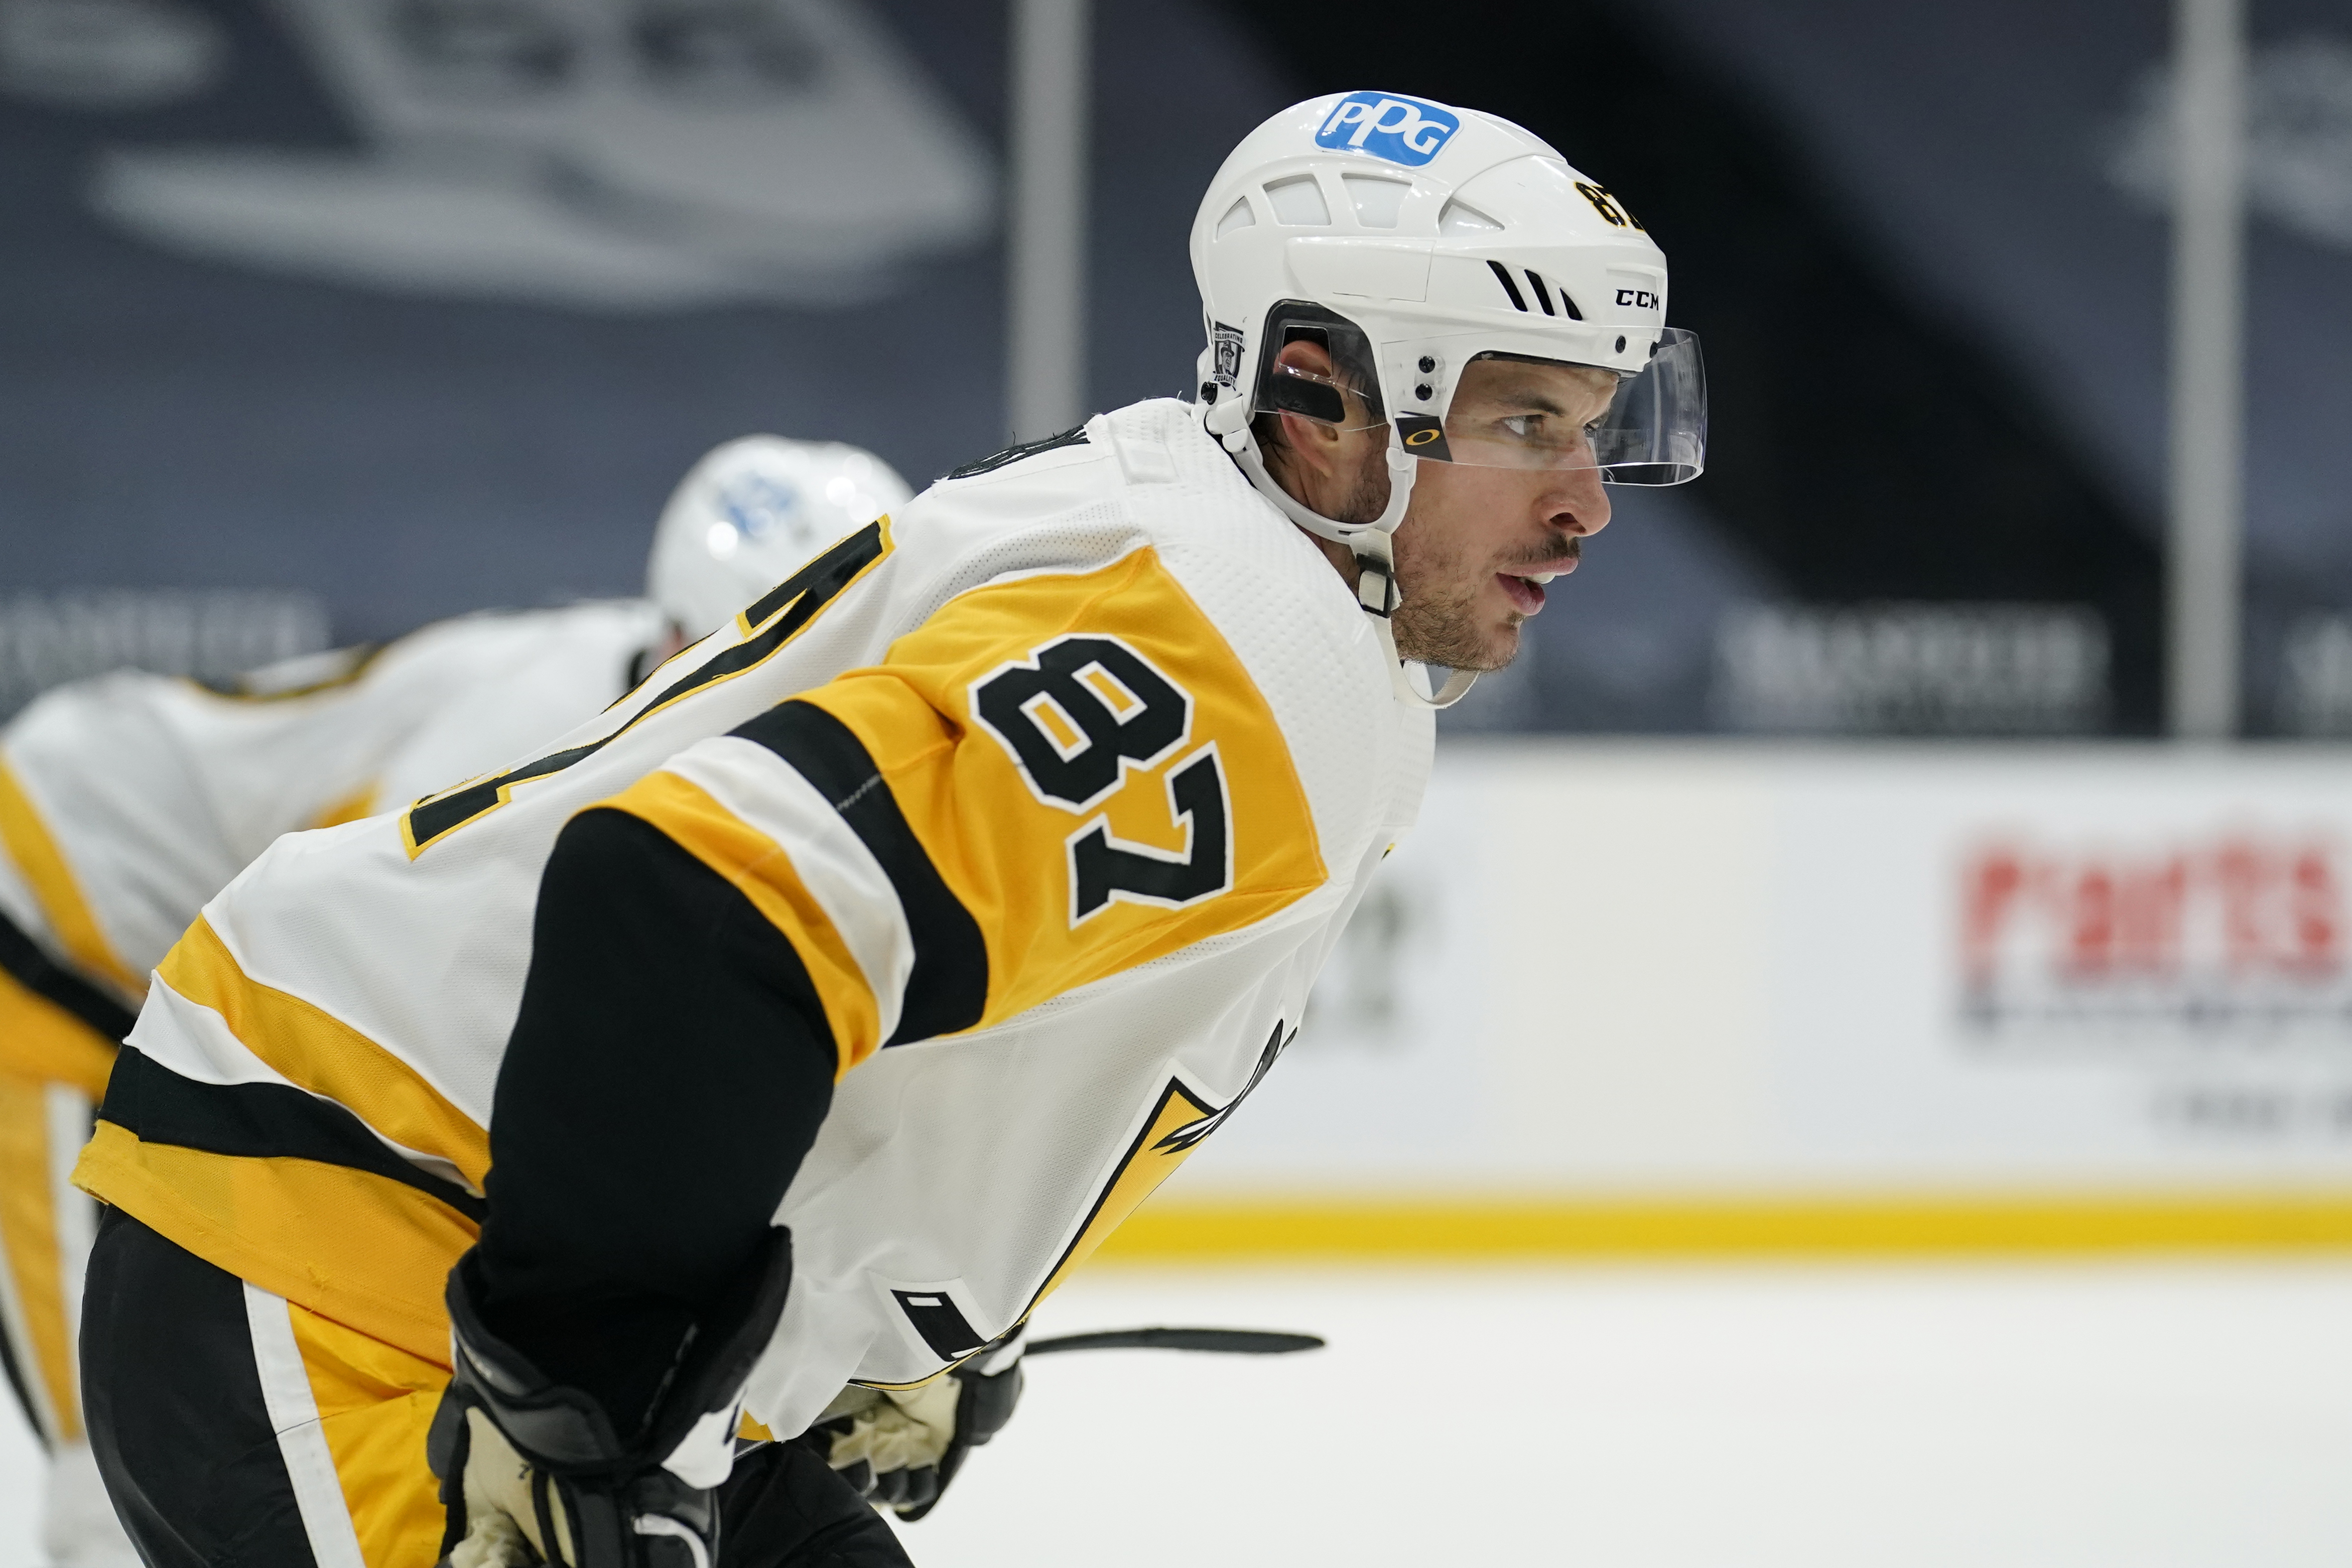 watch pittsburgh penguins game live